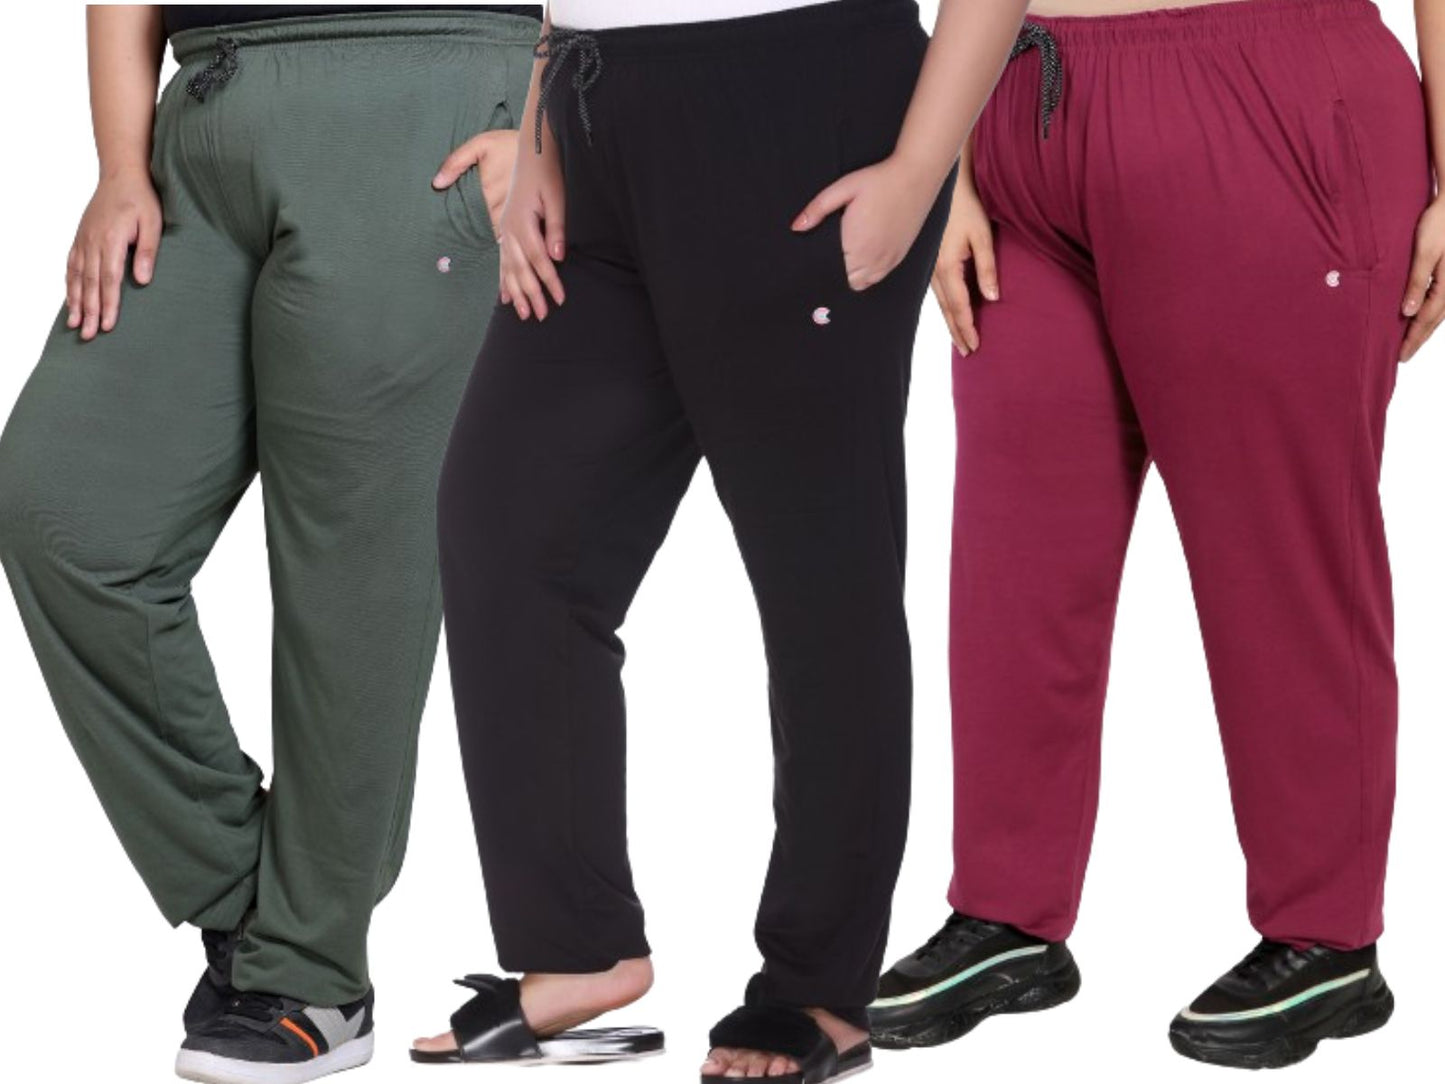 Cotton Track Pants For Women Pack of 3 (Black, Purple & Olive Green)